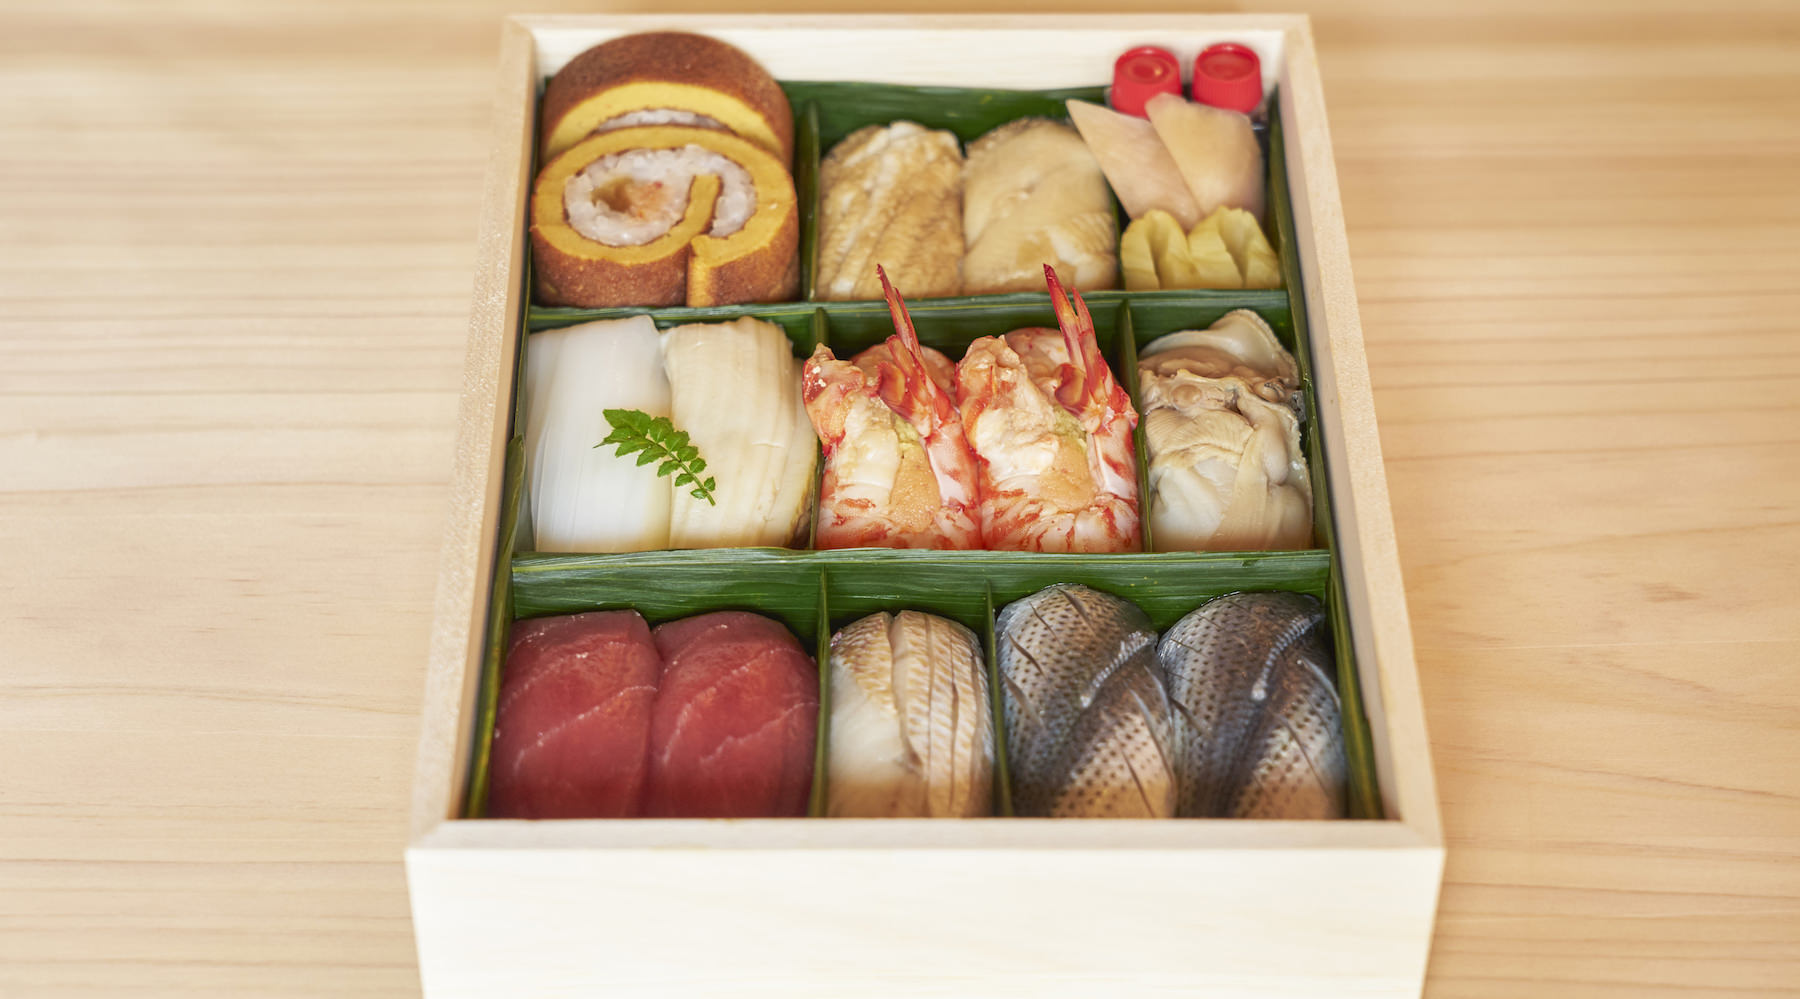 Sushi Ao (Takeaway)'s images3